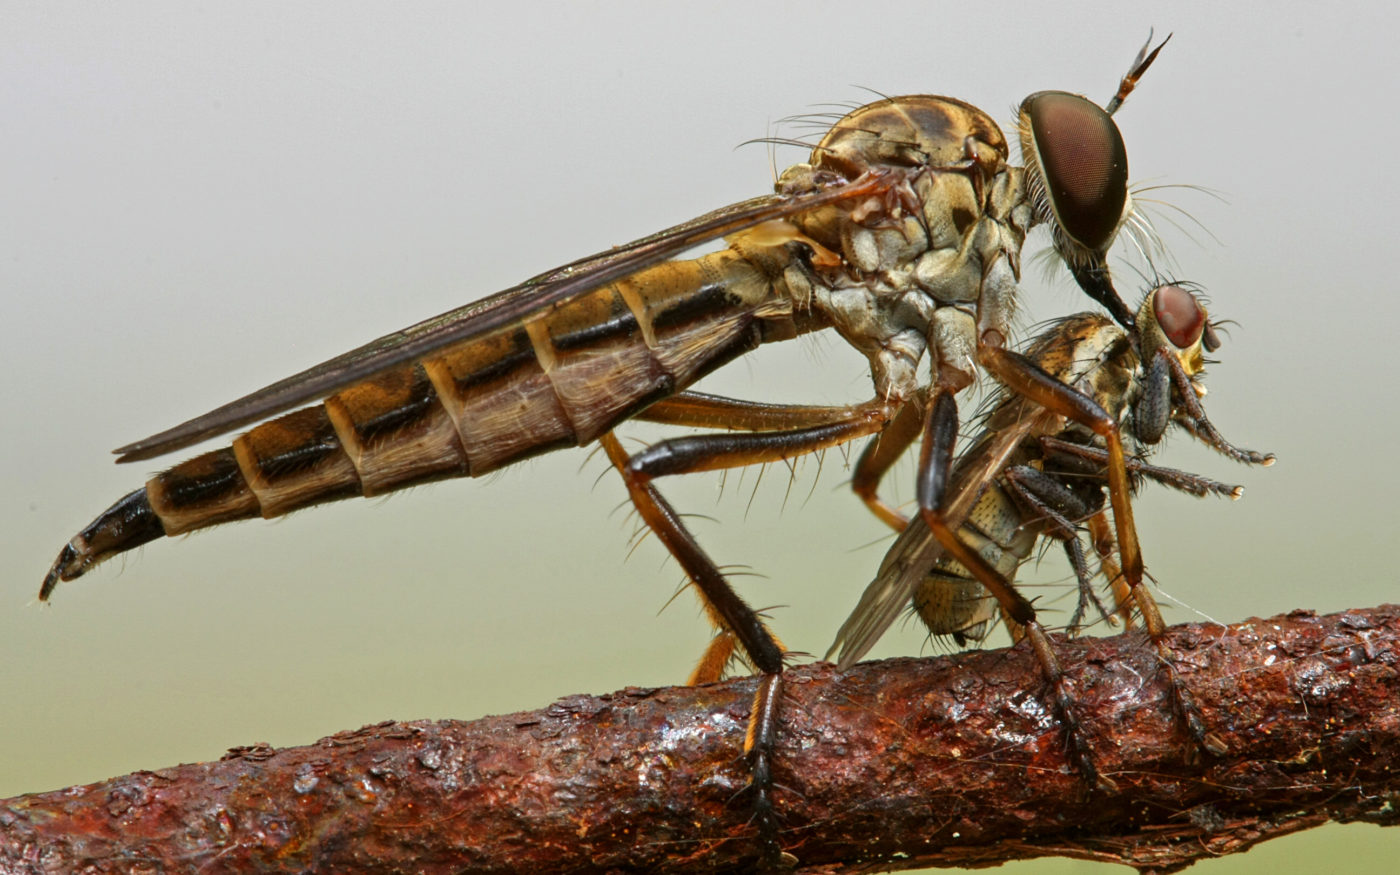 A robber fly with its kill at the edge of the jungle at Punjen Hide-Away in northern Thailand. Having paralysed the prey and injected digestive enzymes, the predator is about to ingest its liquefying meal. Nick Milsum has found